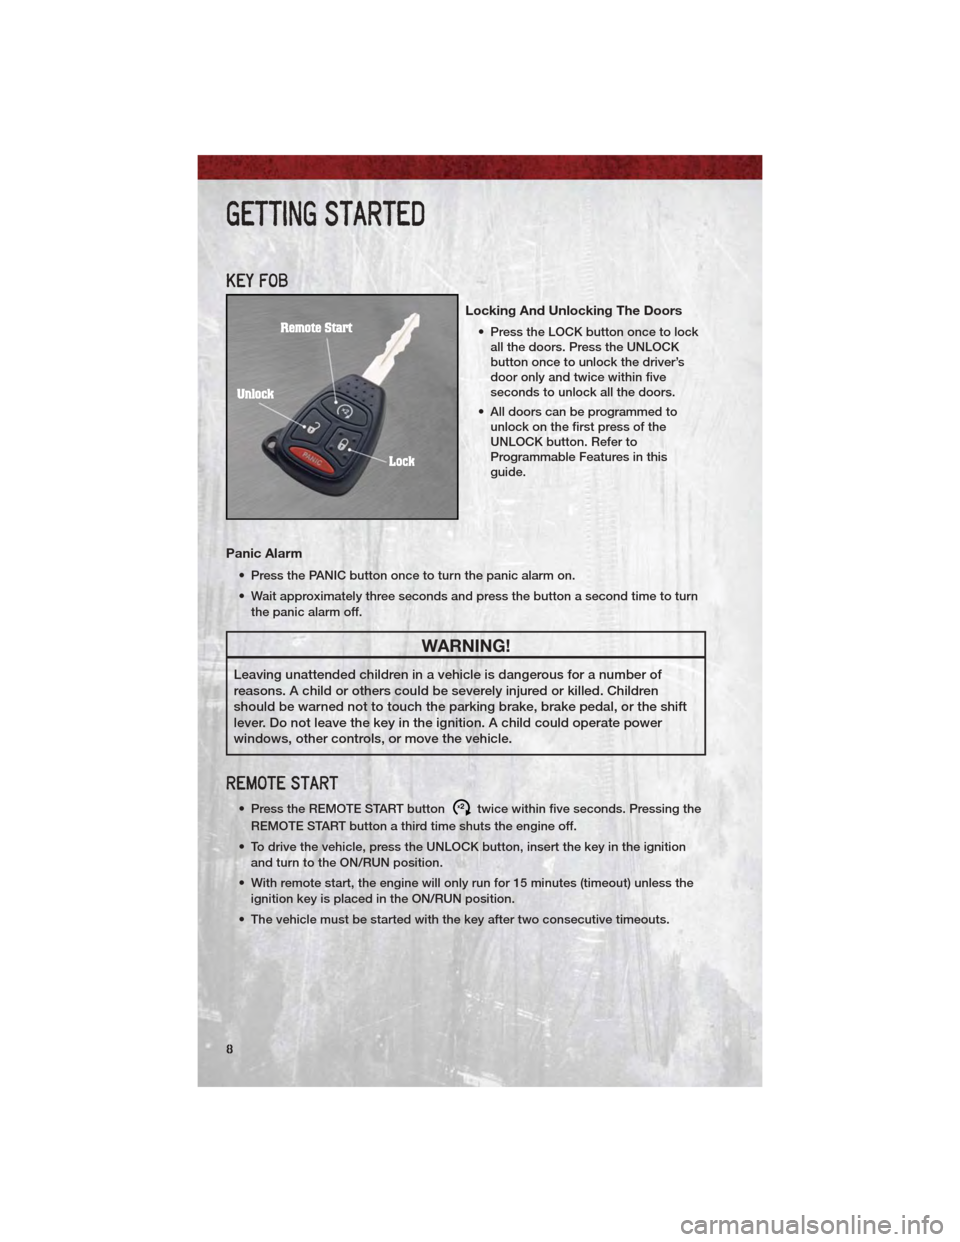 DODGE DAKOTA 2011 3.G User Guide KEY FOB
Locking And Unlocking The Doors
• Press the LOCK button once to lockall the doors. Press the UNLOCK
button once to unlock the driver’s
door only and twice within five
seconds to unlock all